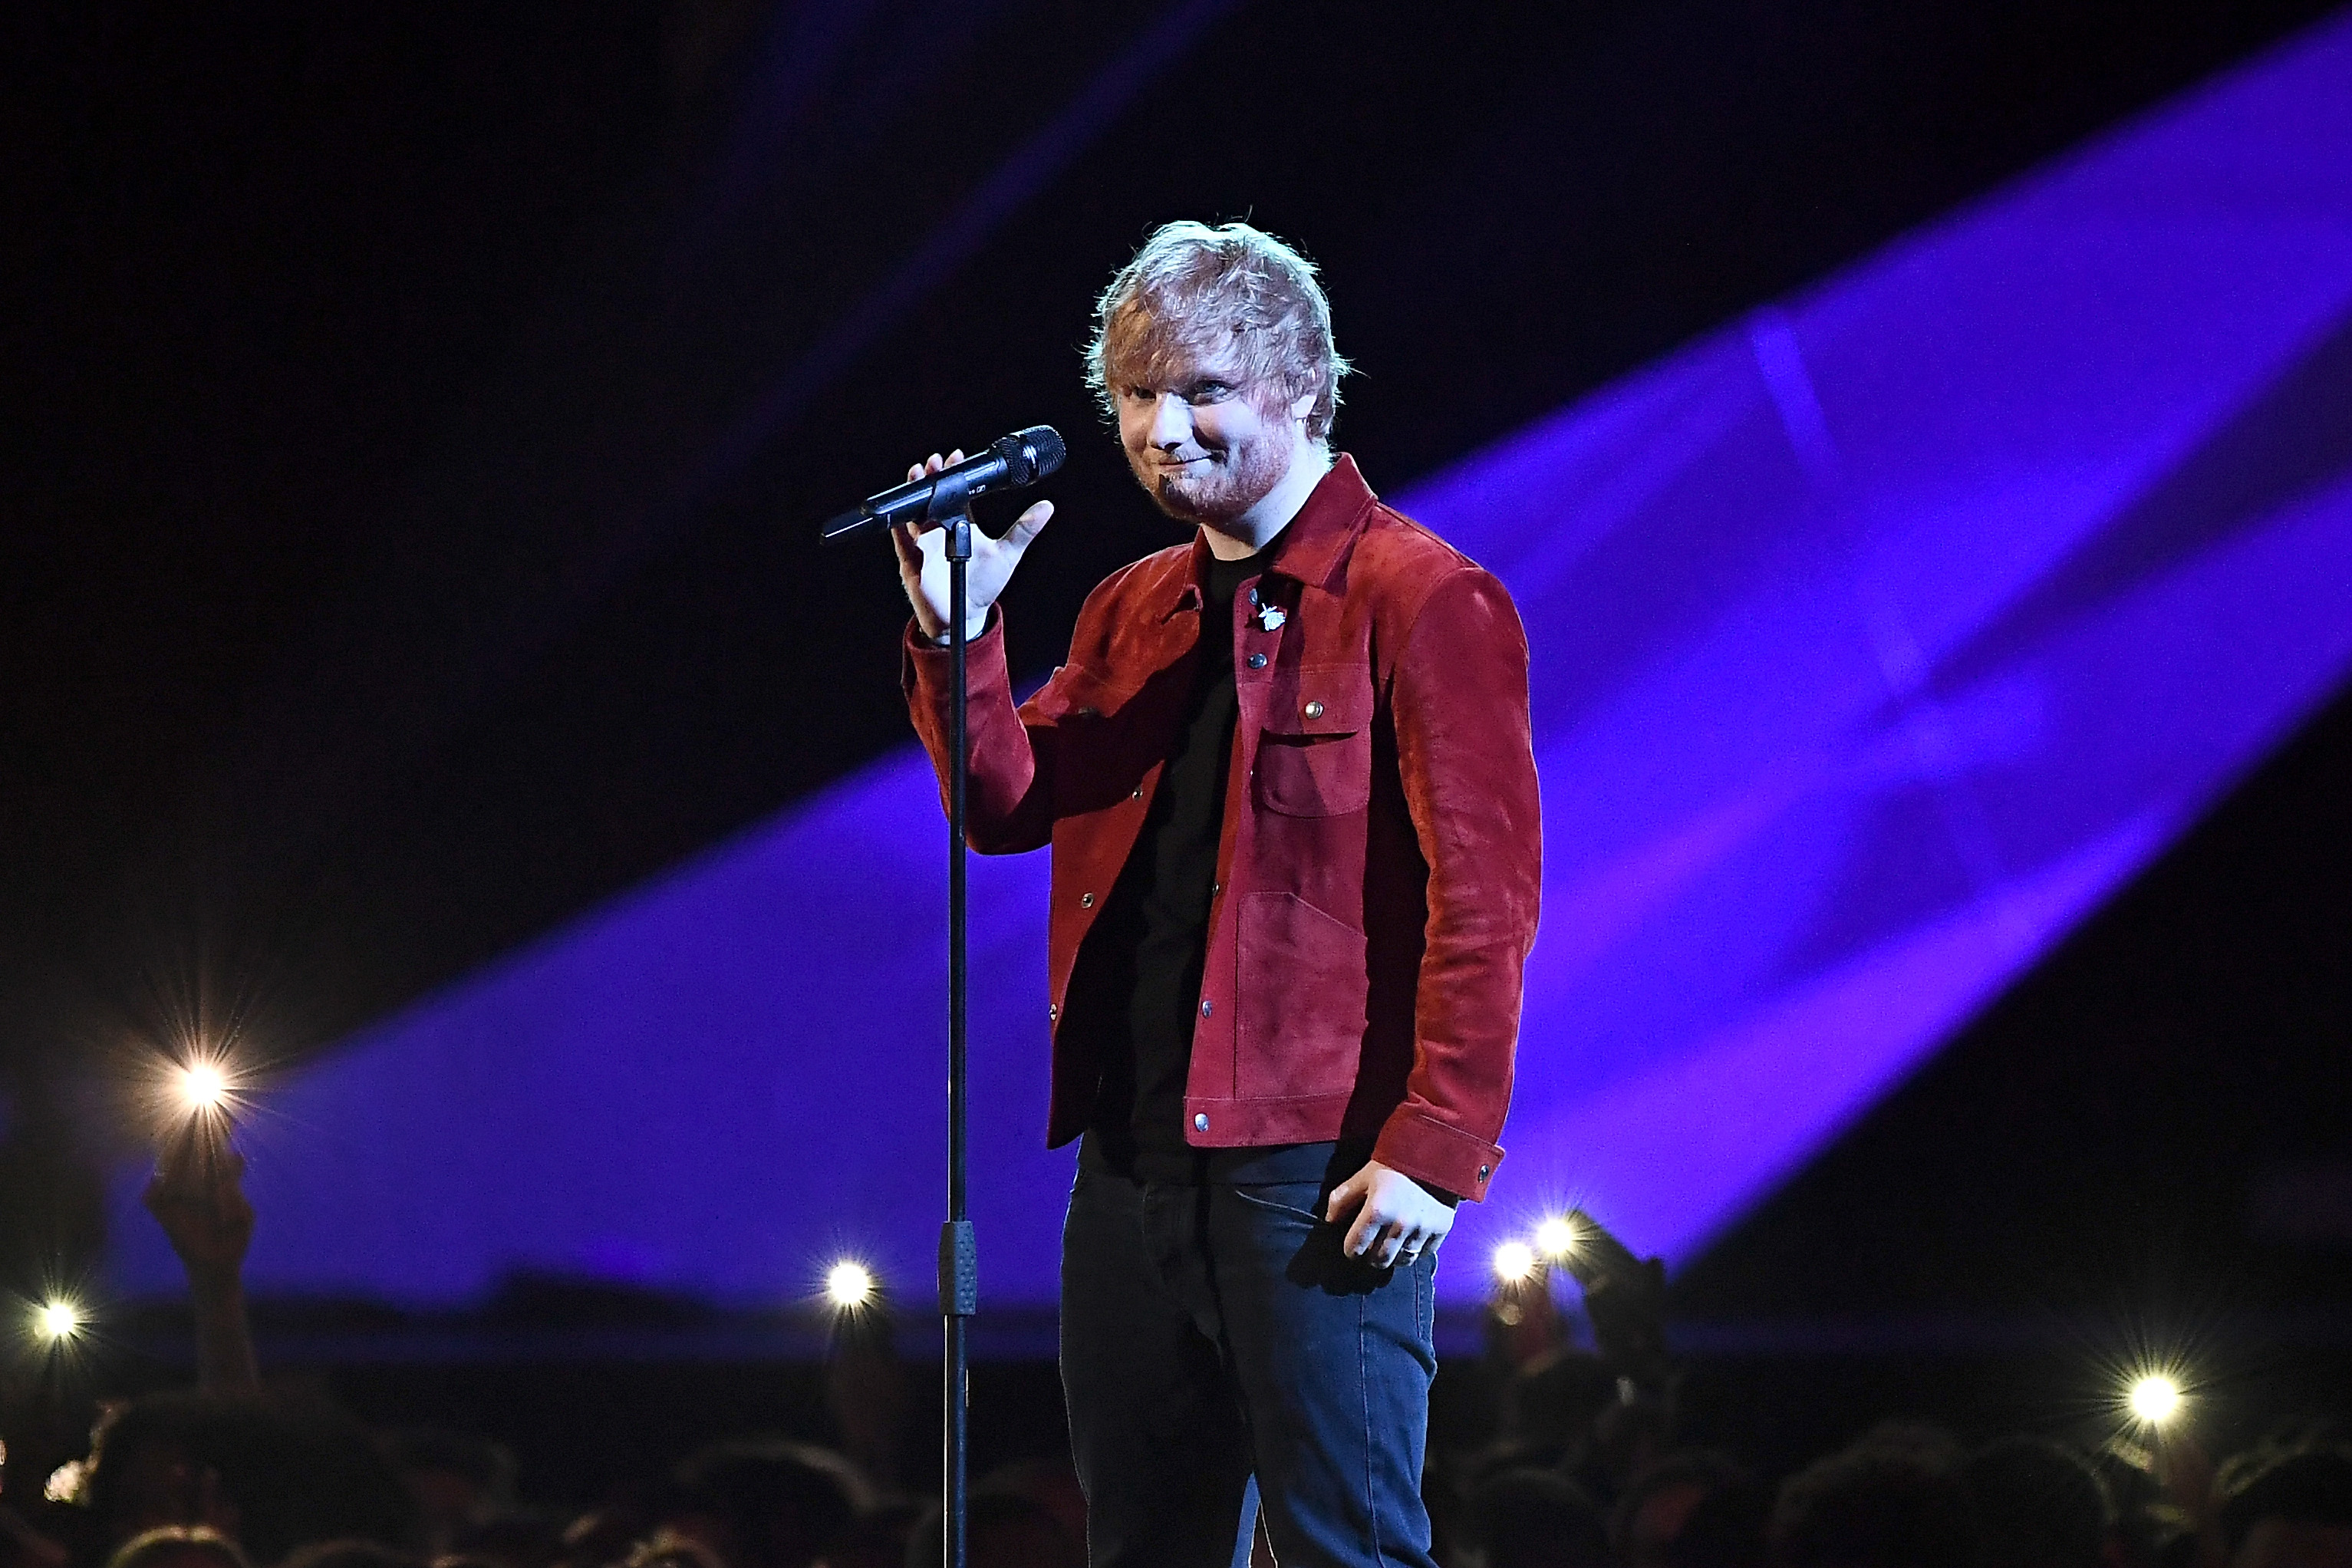 Ed Sheeran in a red jacket on stage at an awards show.